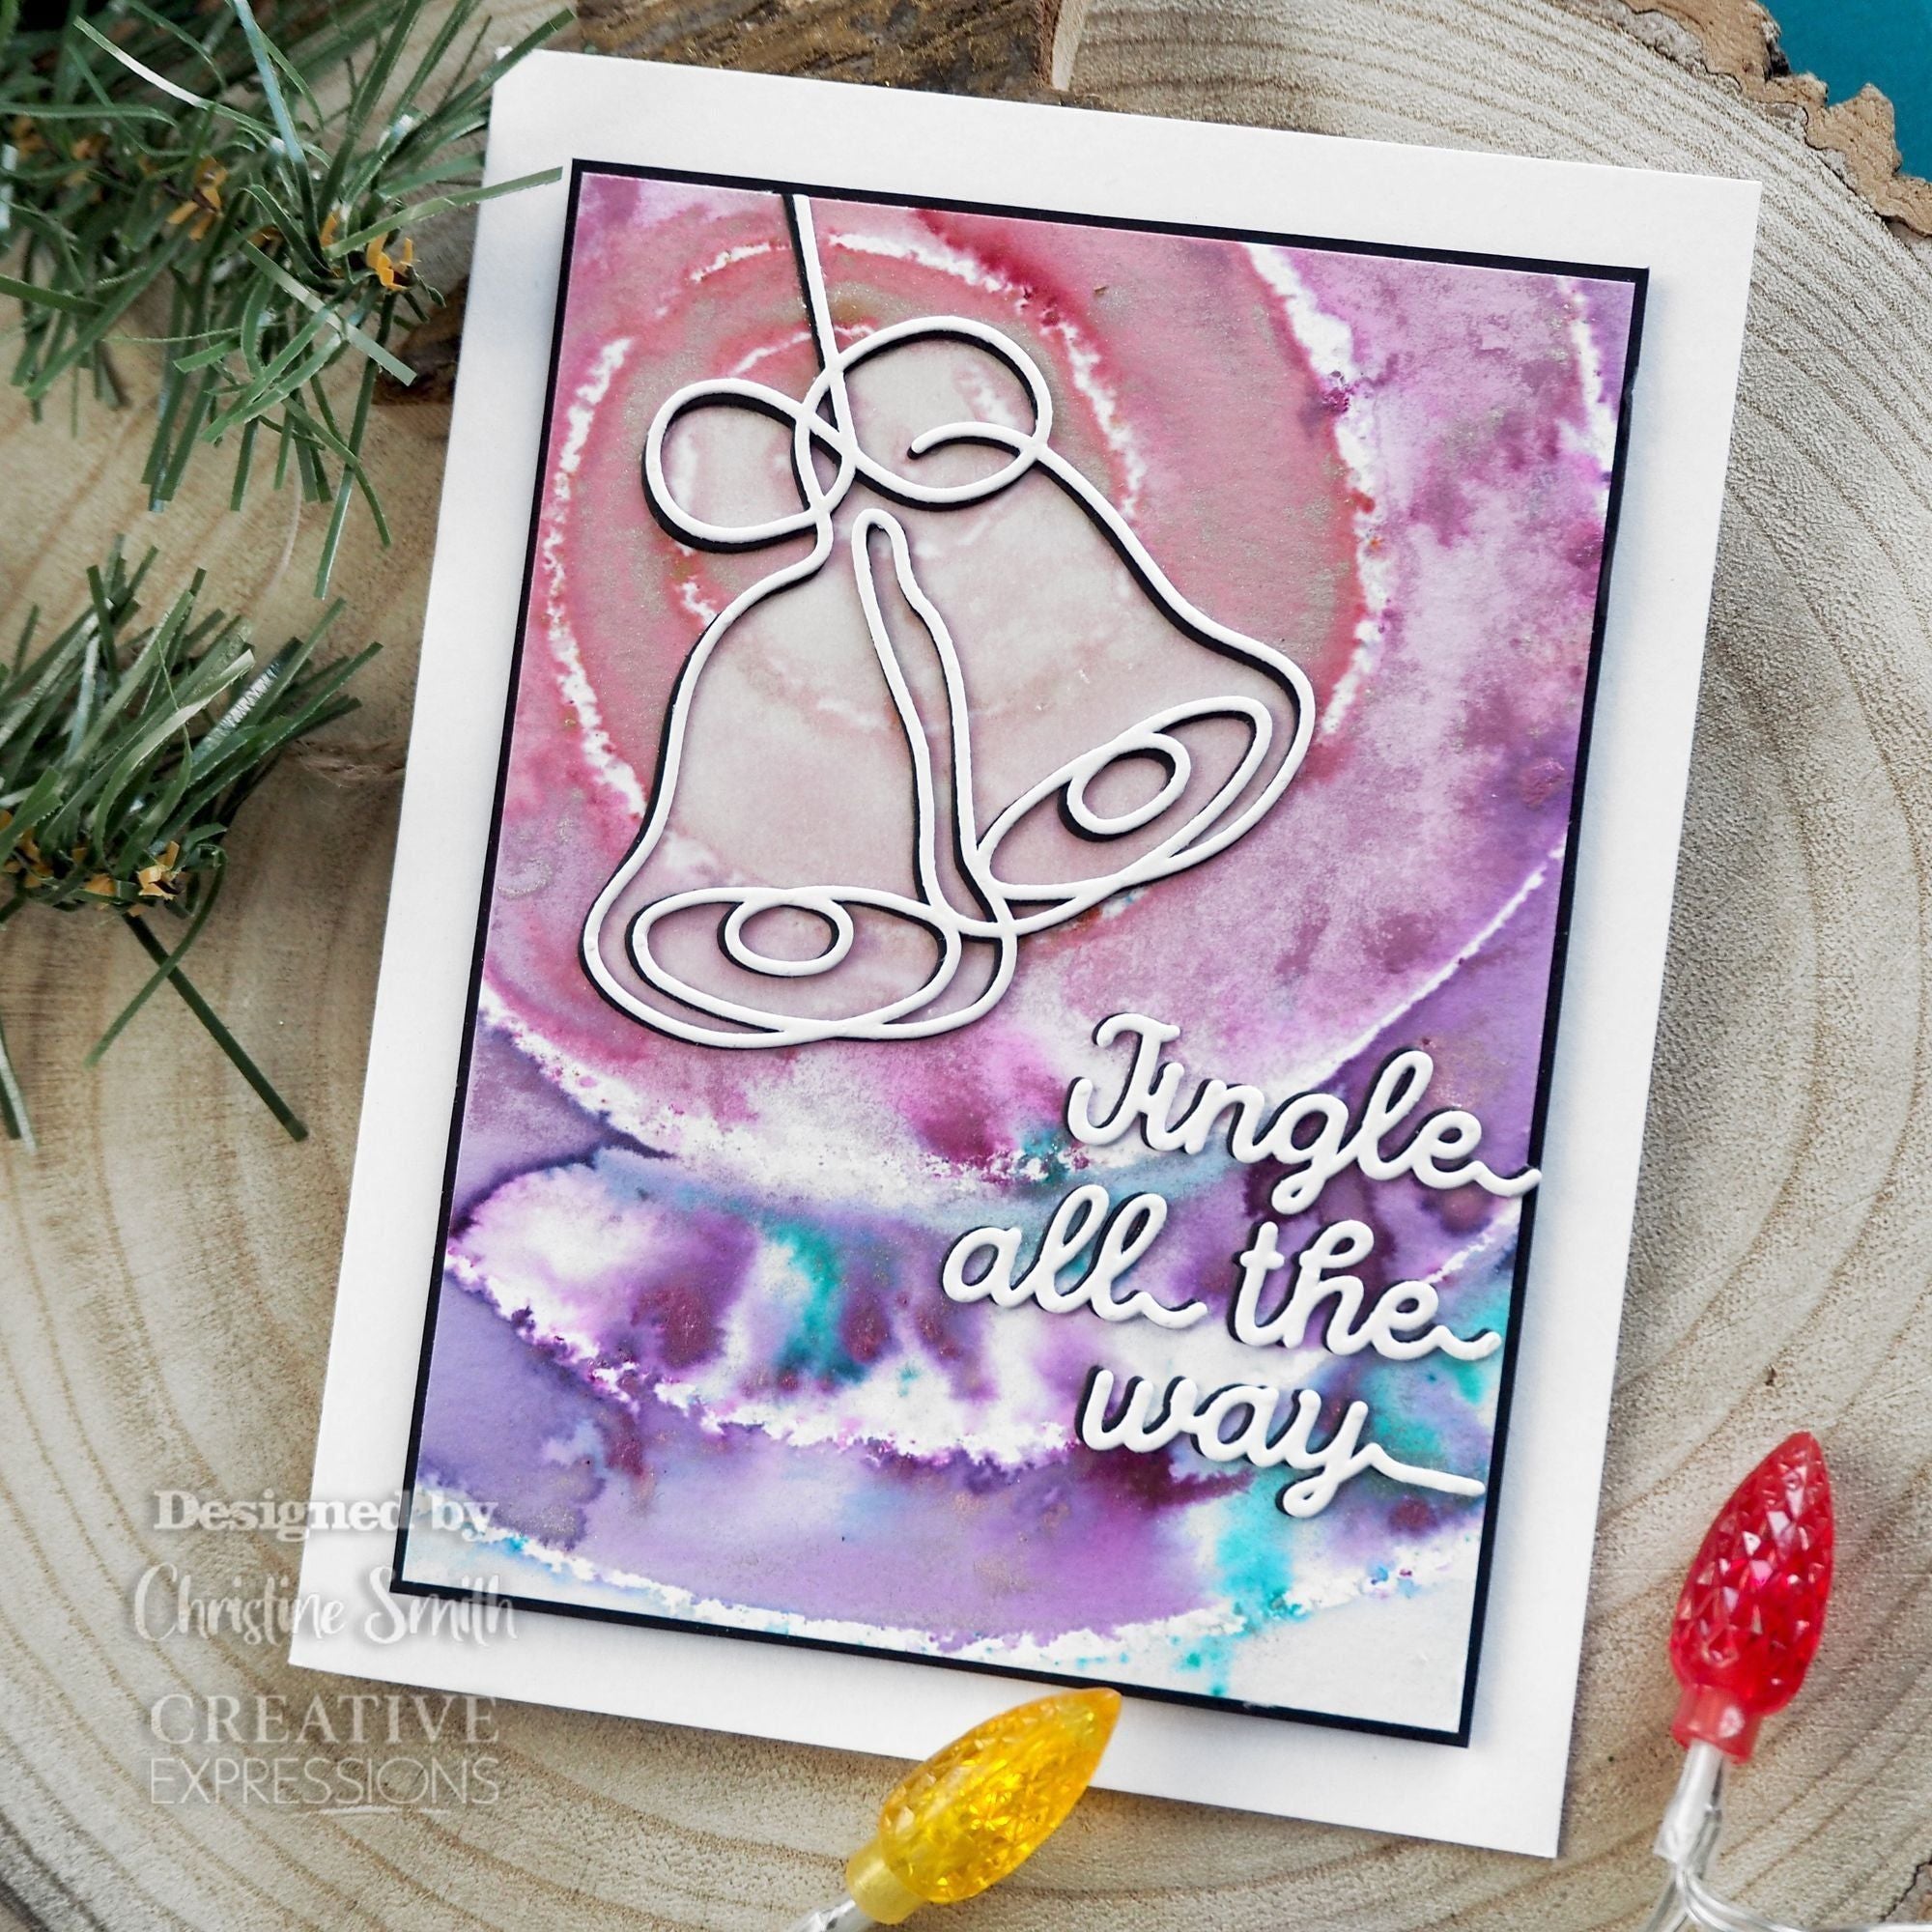 Creative Expressions One-liner Collection Jingle Bells Craft Die